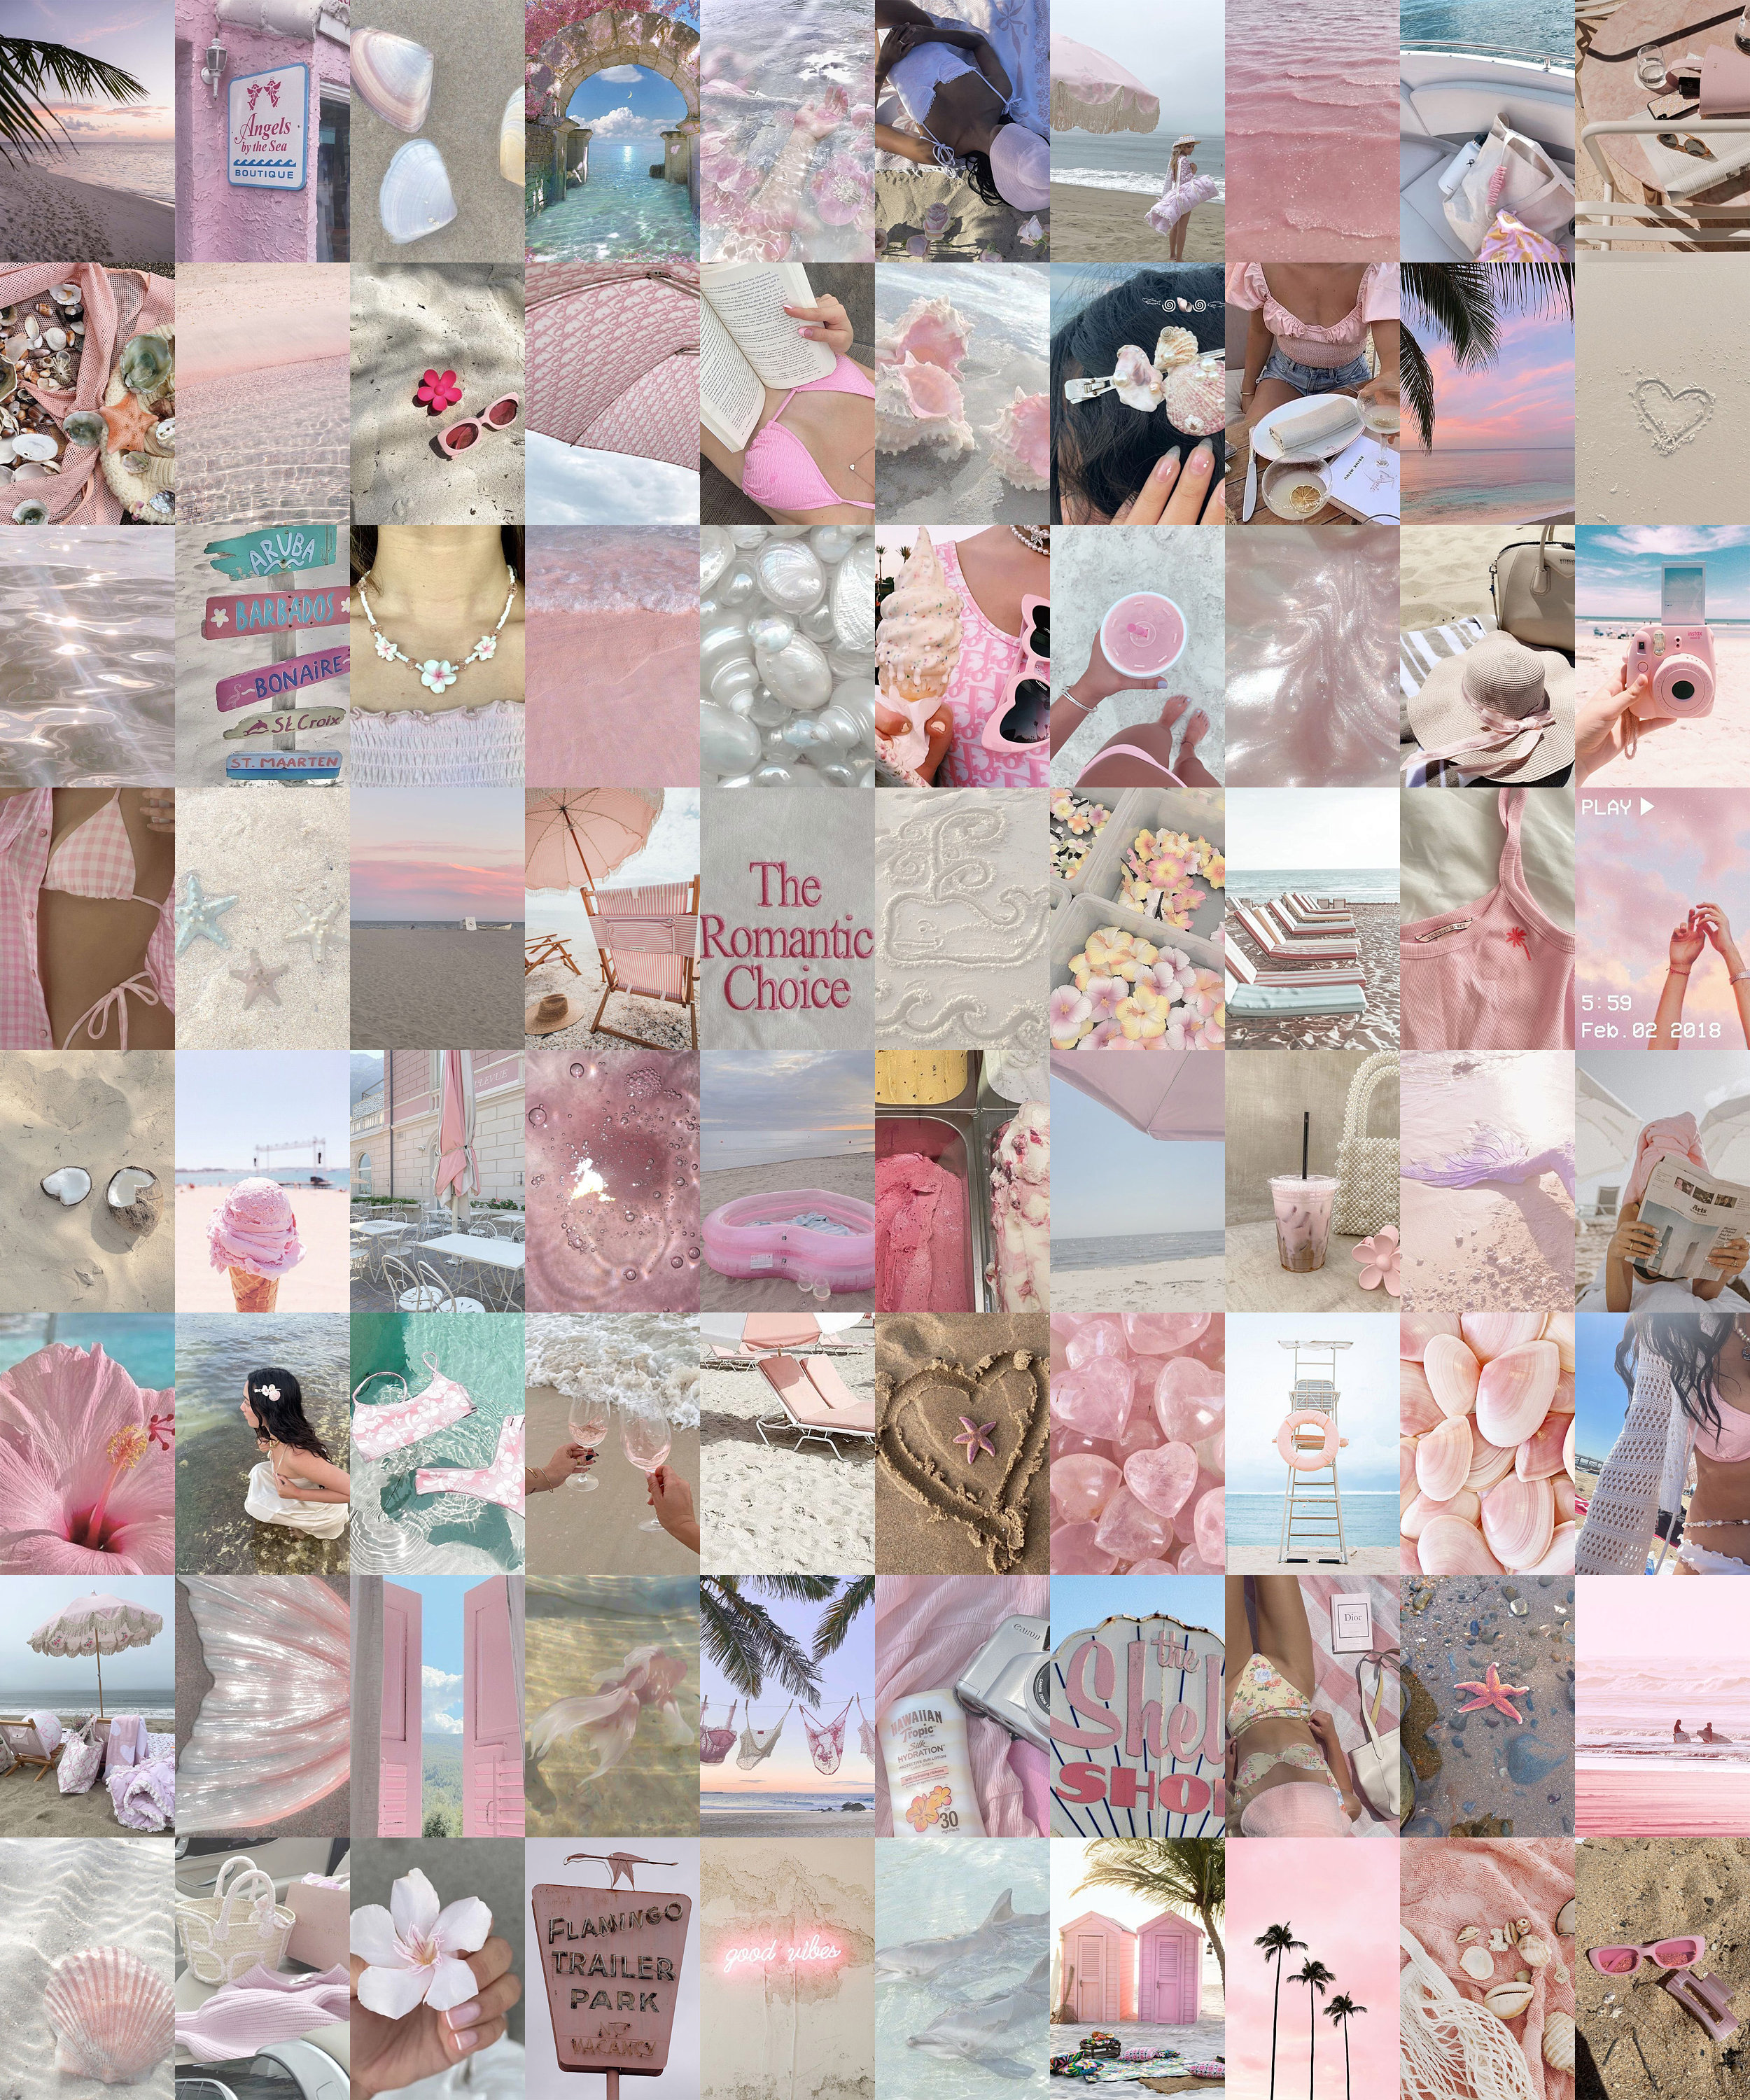 Download Pink Themed Luxury Brand Preppy PFP Collage Wallpaper